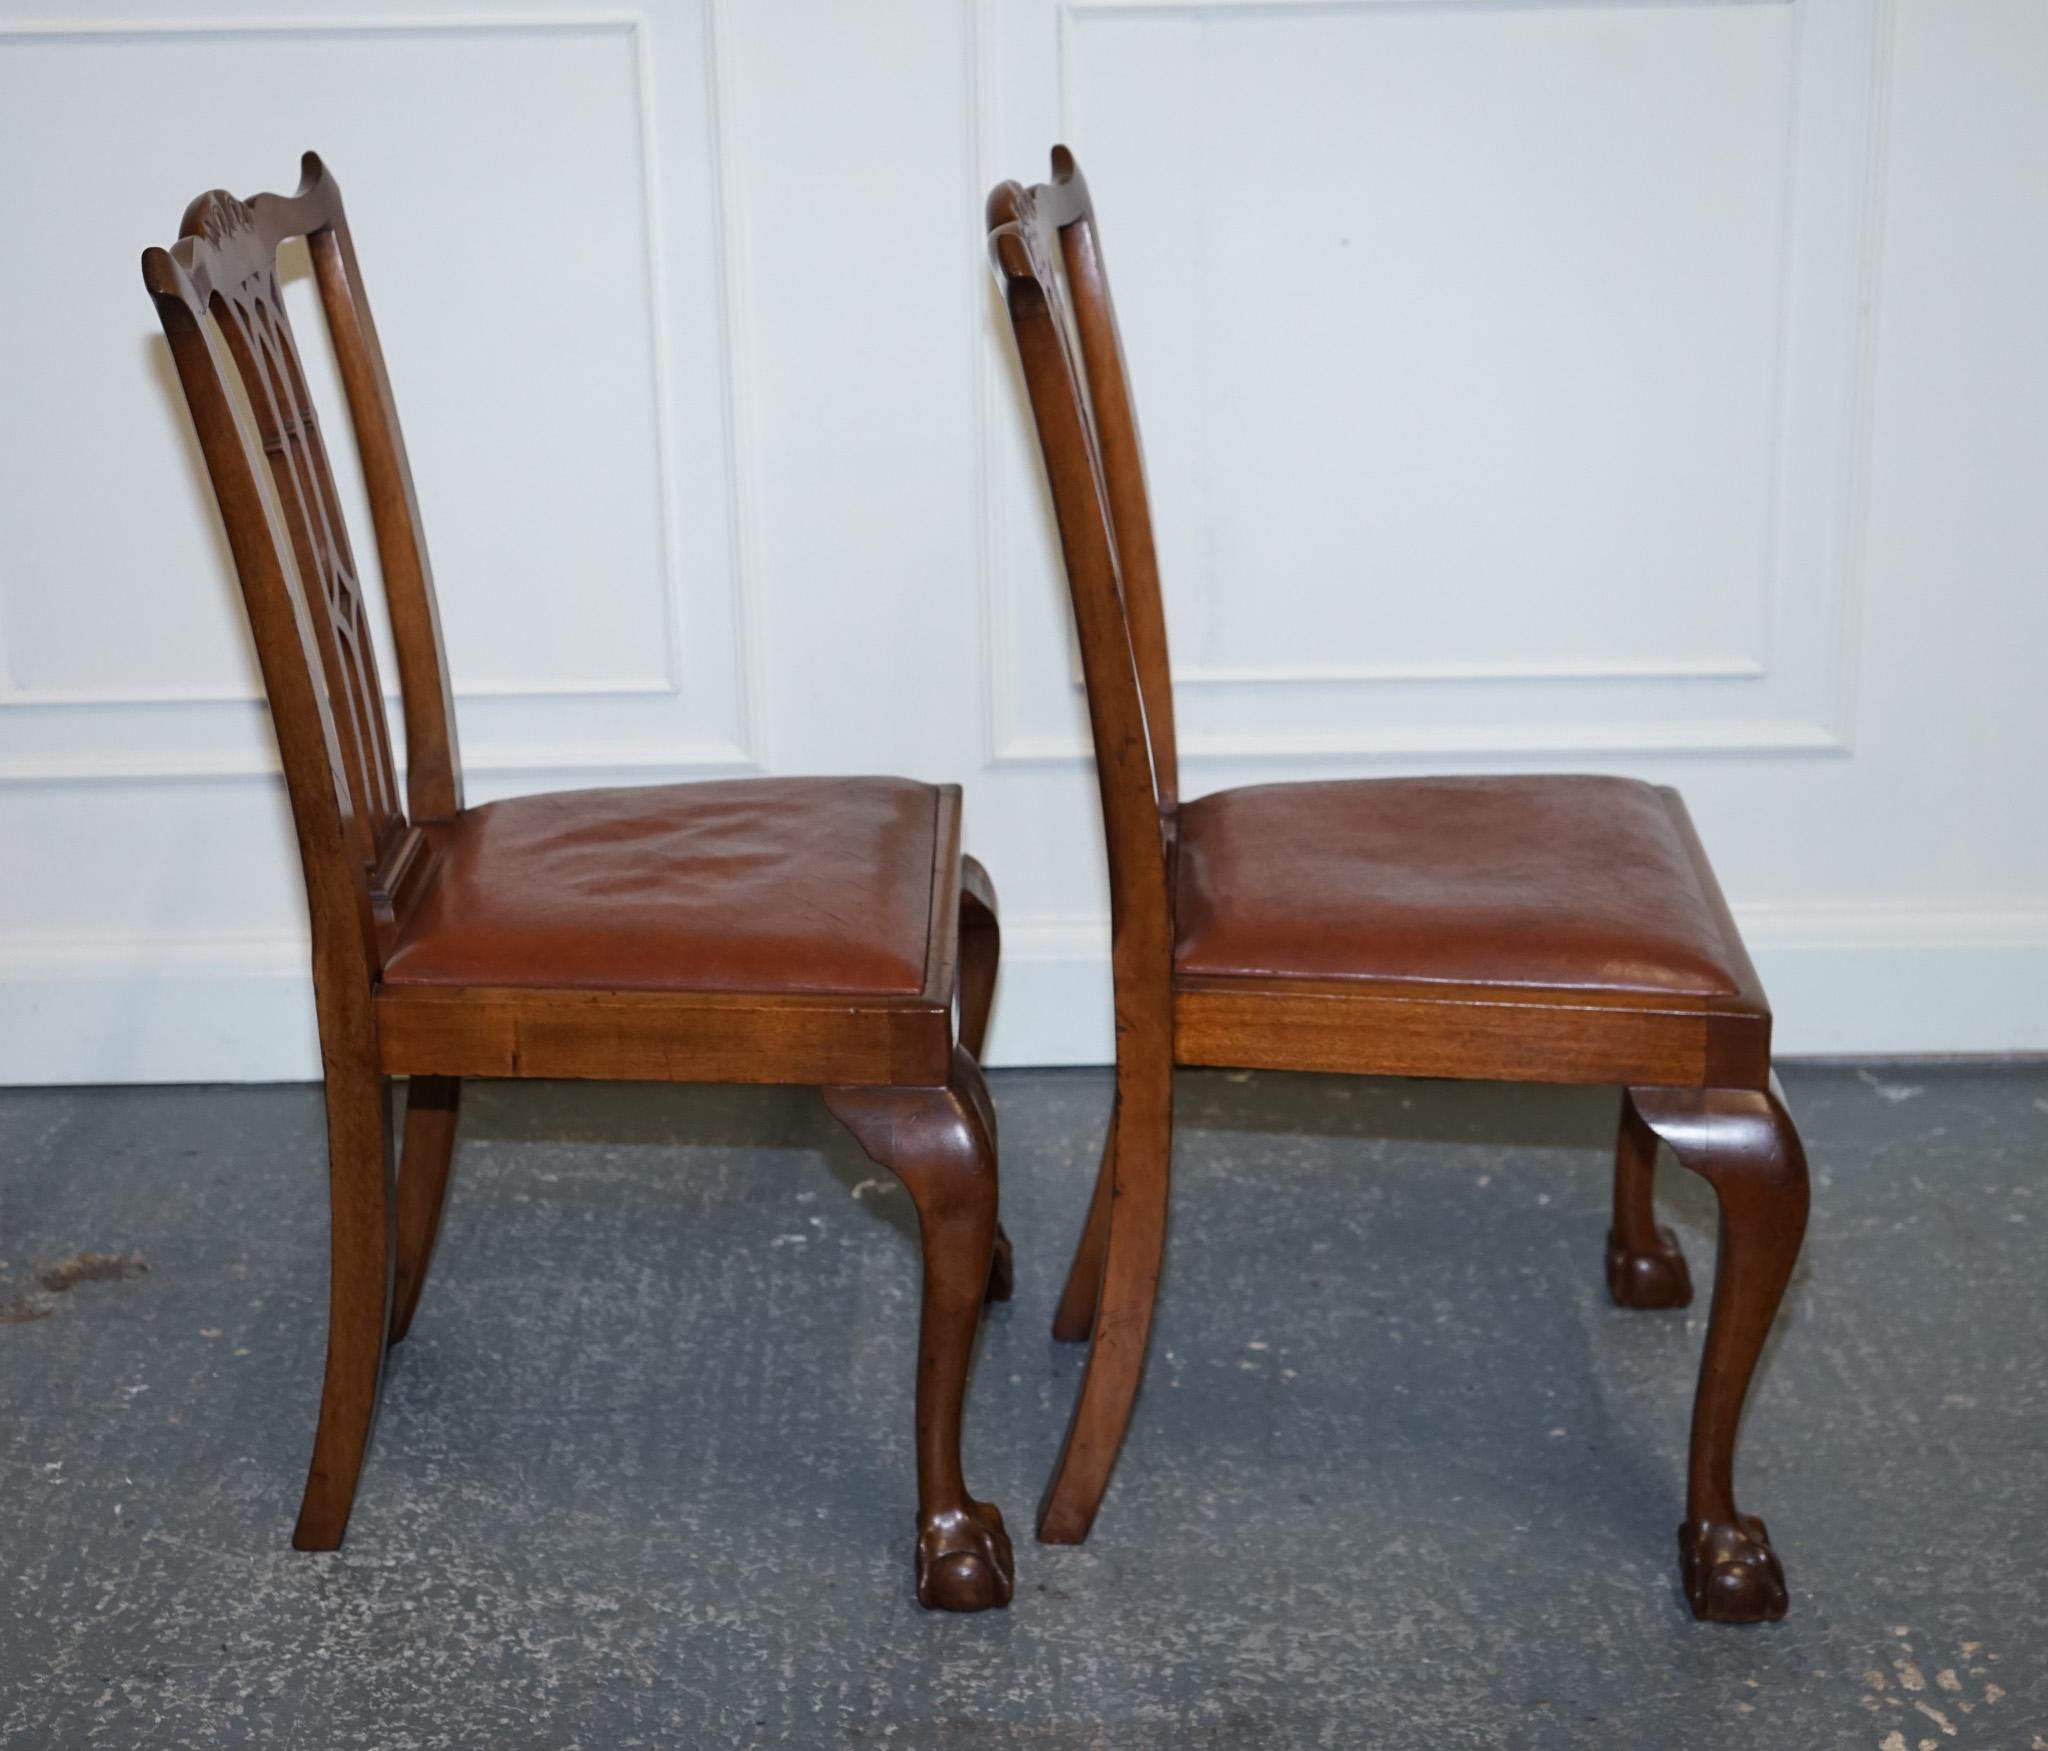 British CHIPPENDALE STYLE 5 DINING CHAIRS WiTH LEATHER SEATS PERFECT FOR ROUND TABLE For Sale